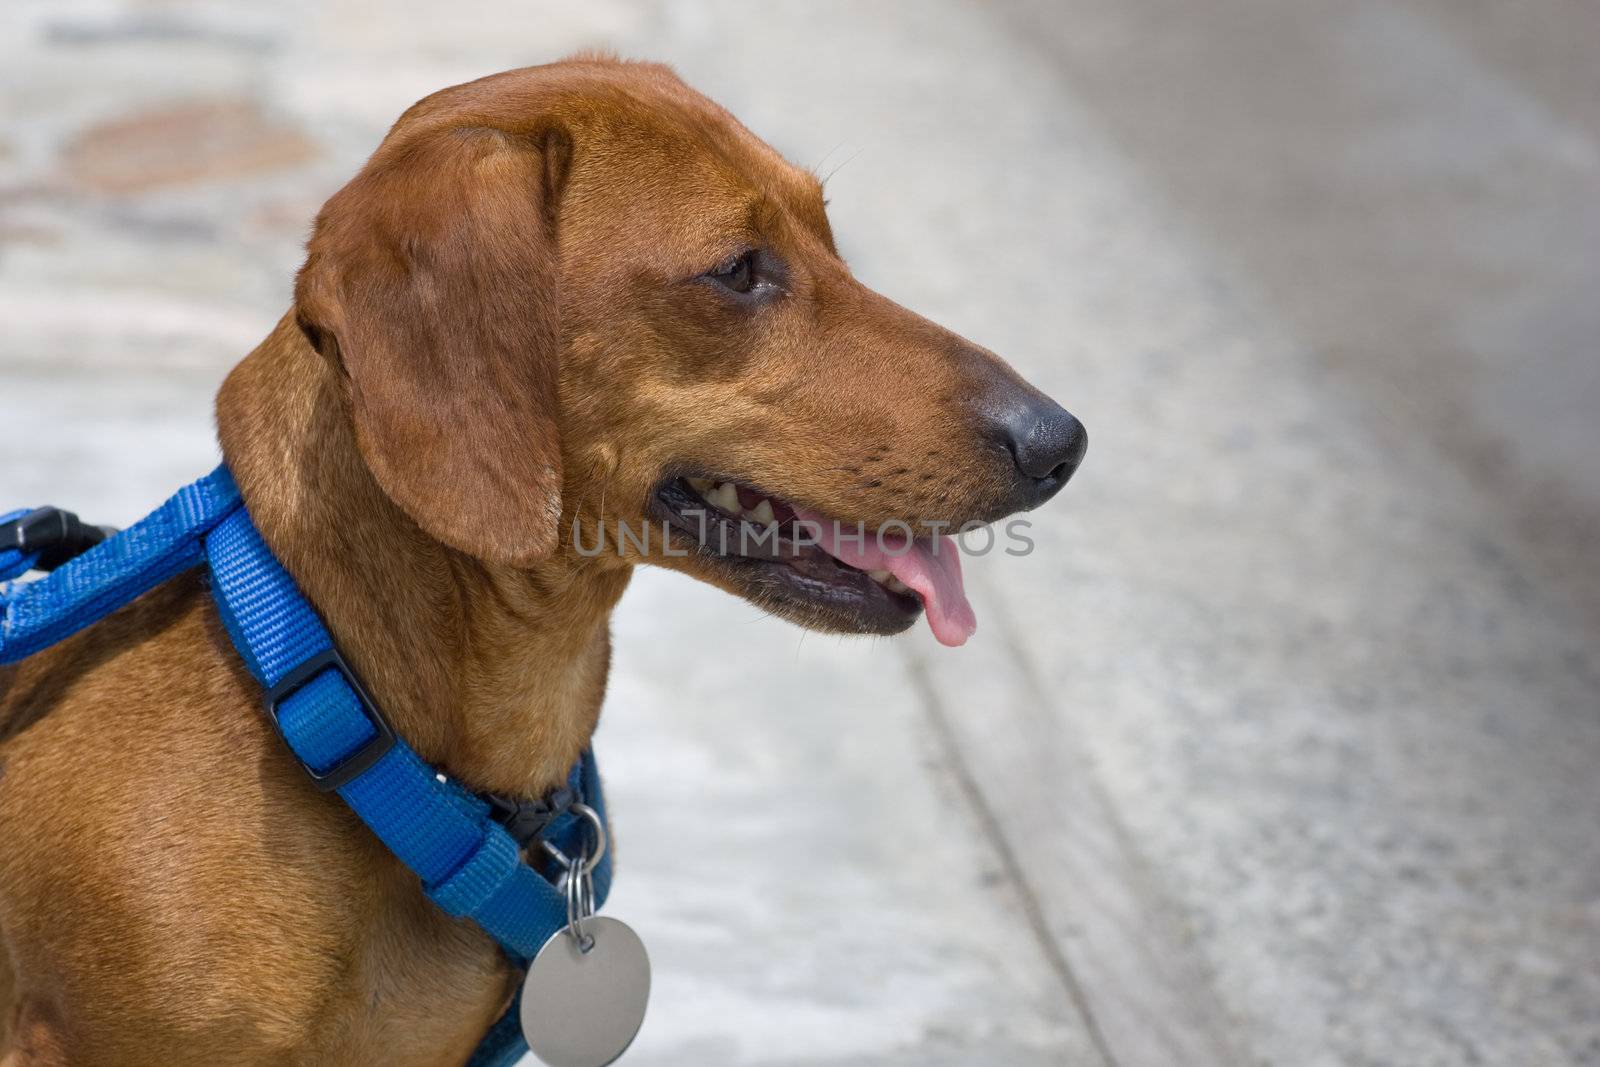 A miniature dachshund, in a blue harness, blank tag and tongue hanging, looking attentive, straight ahead.